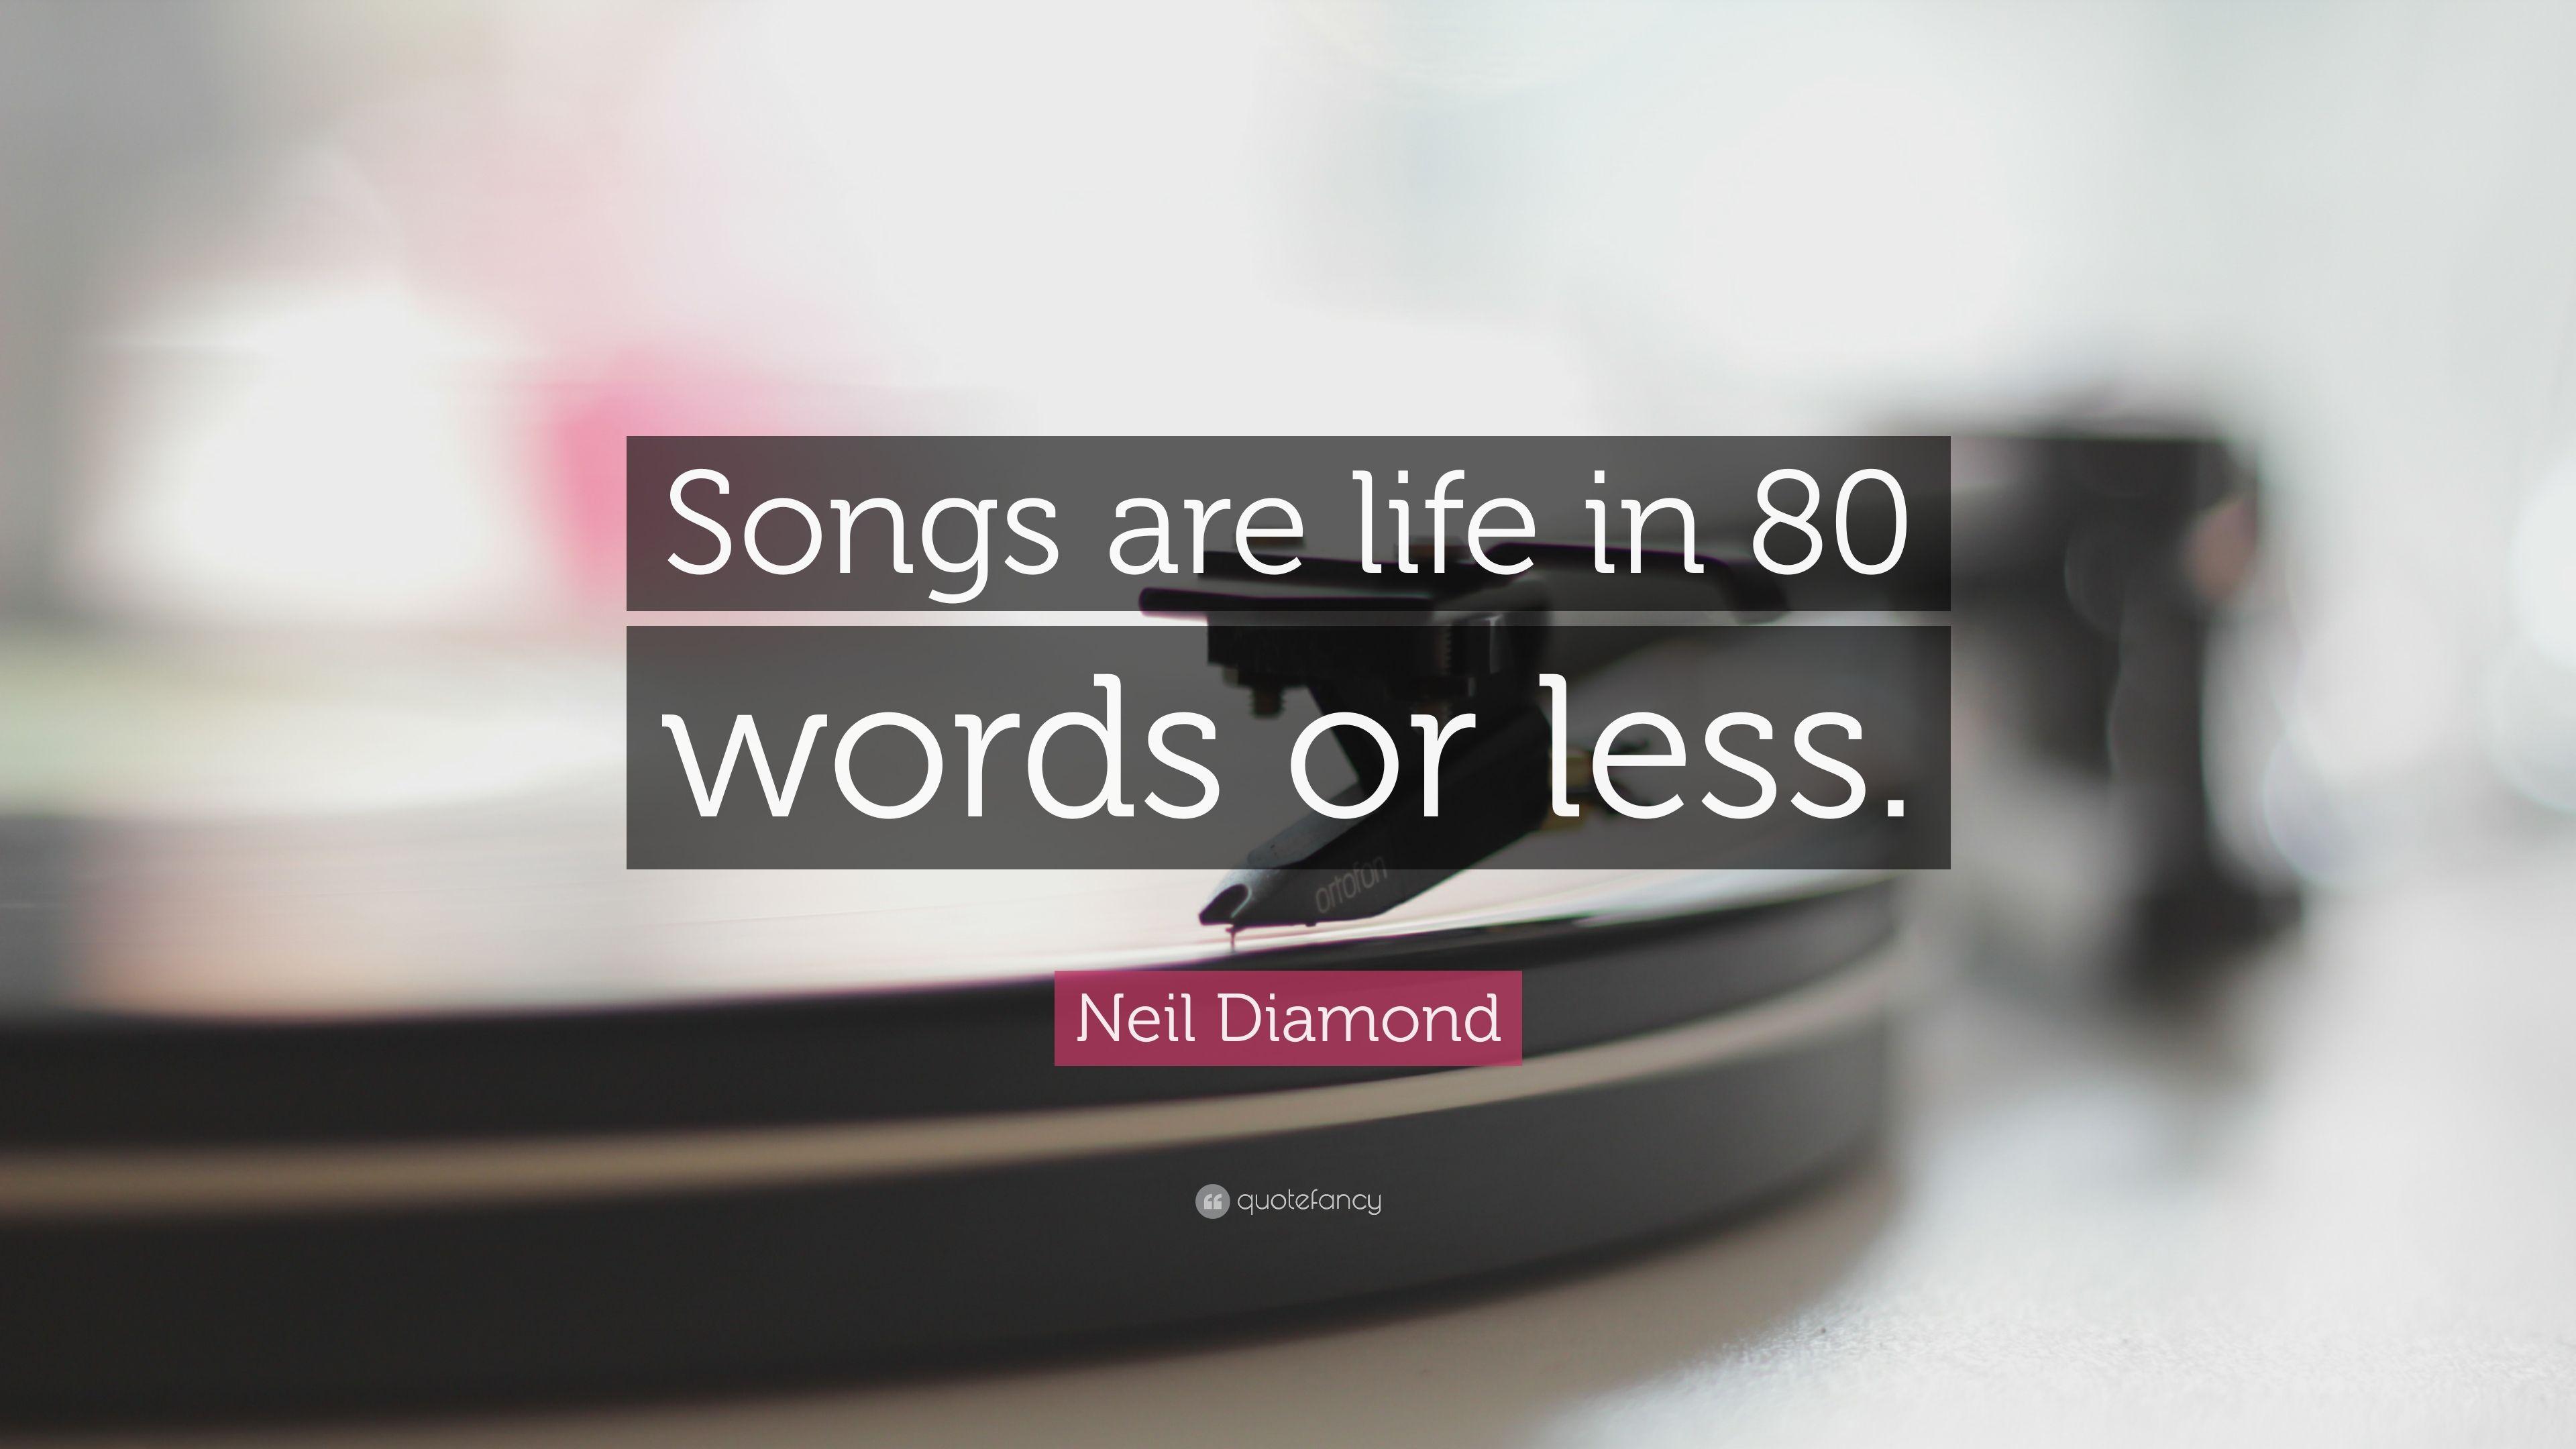 Neil Diamond Quote: “Songs are life in 80 words or less.” 7